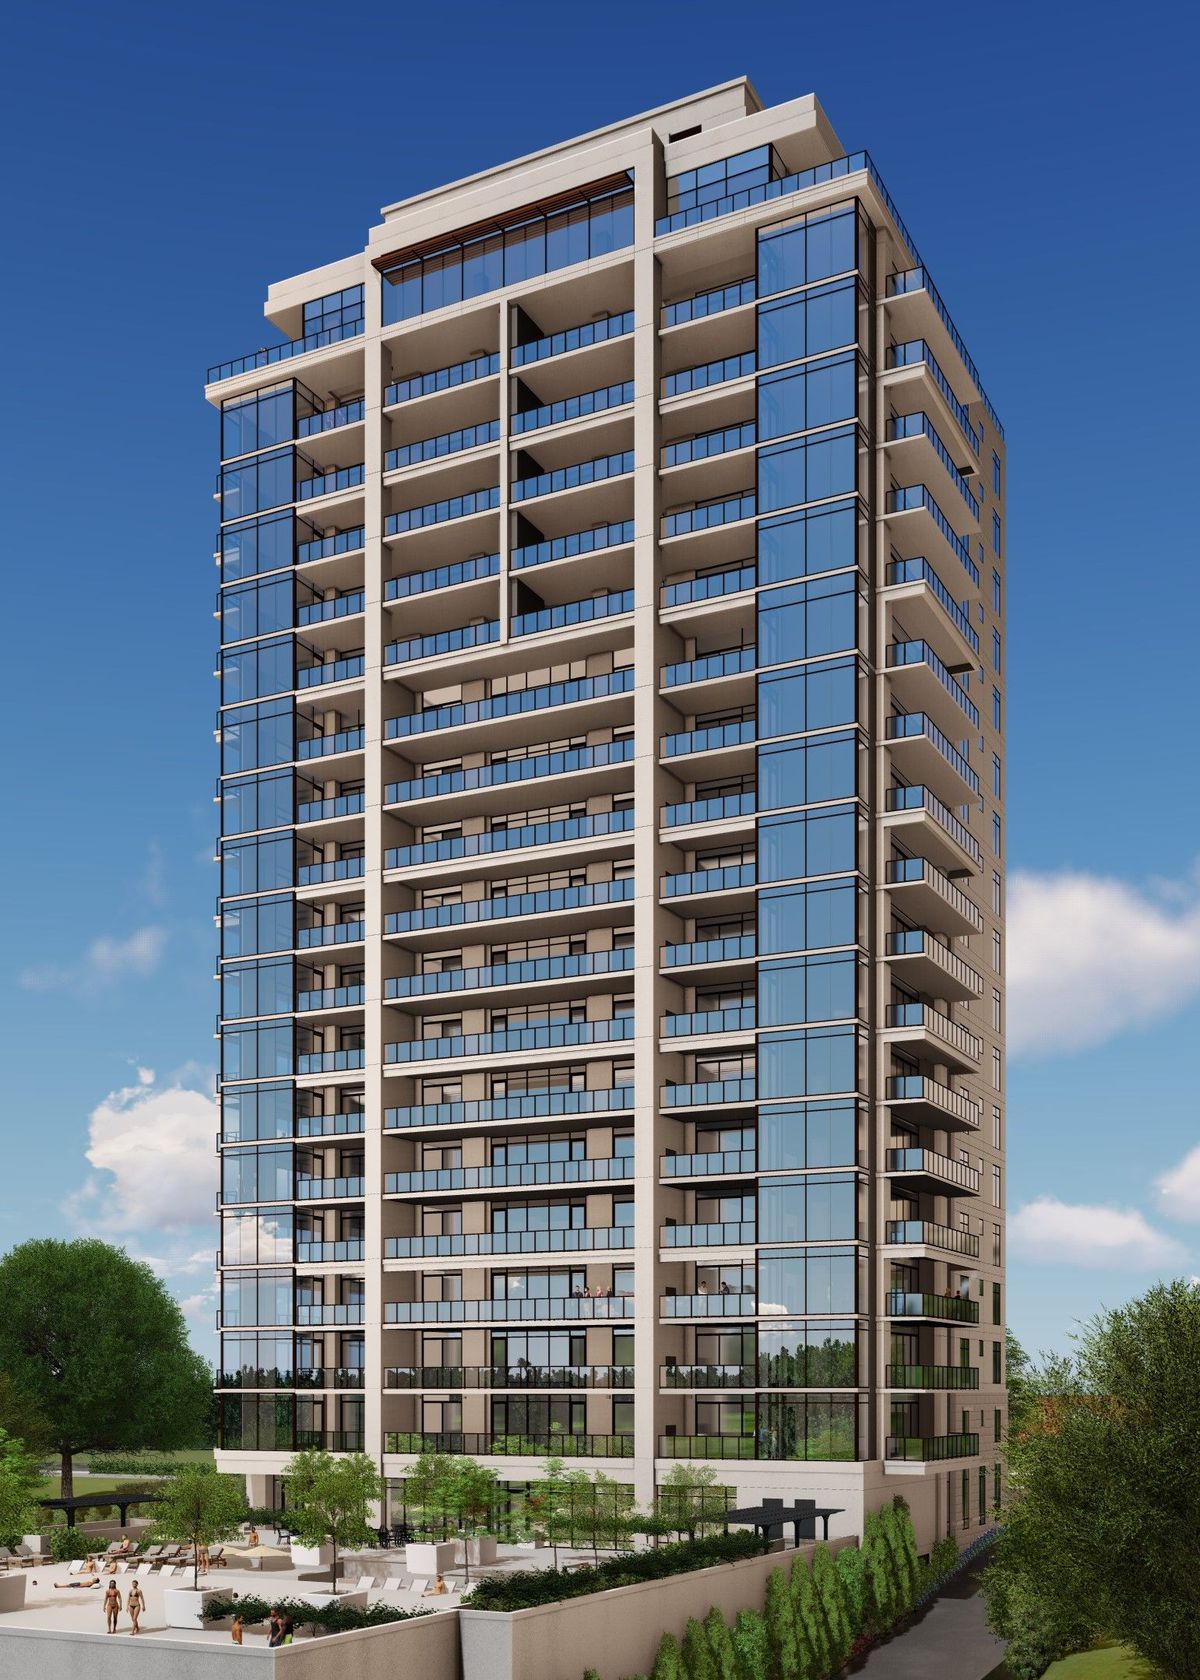 A rendering of a tall condo building girded by tress at the base. 